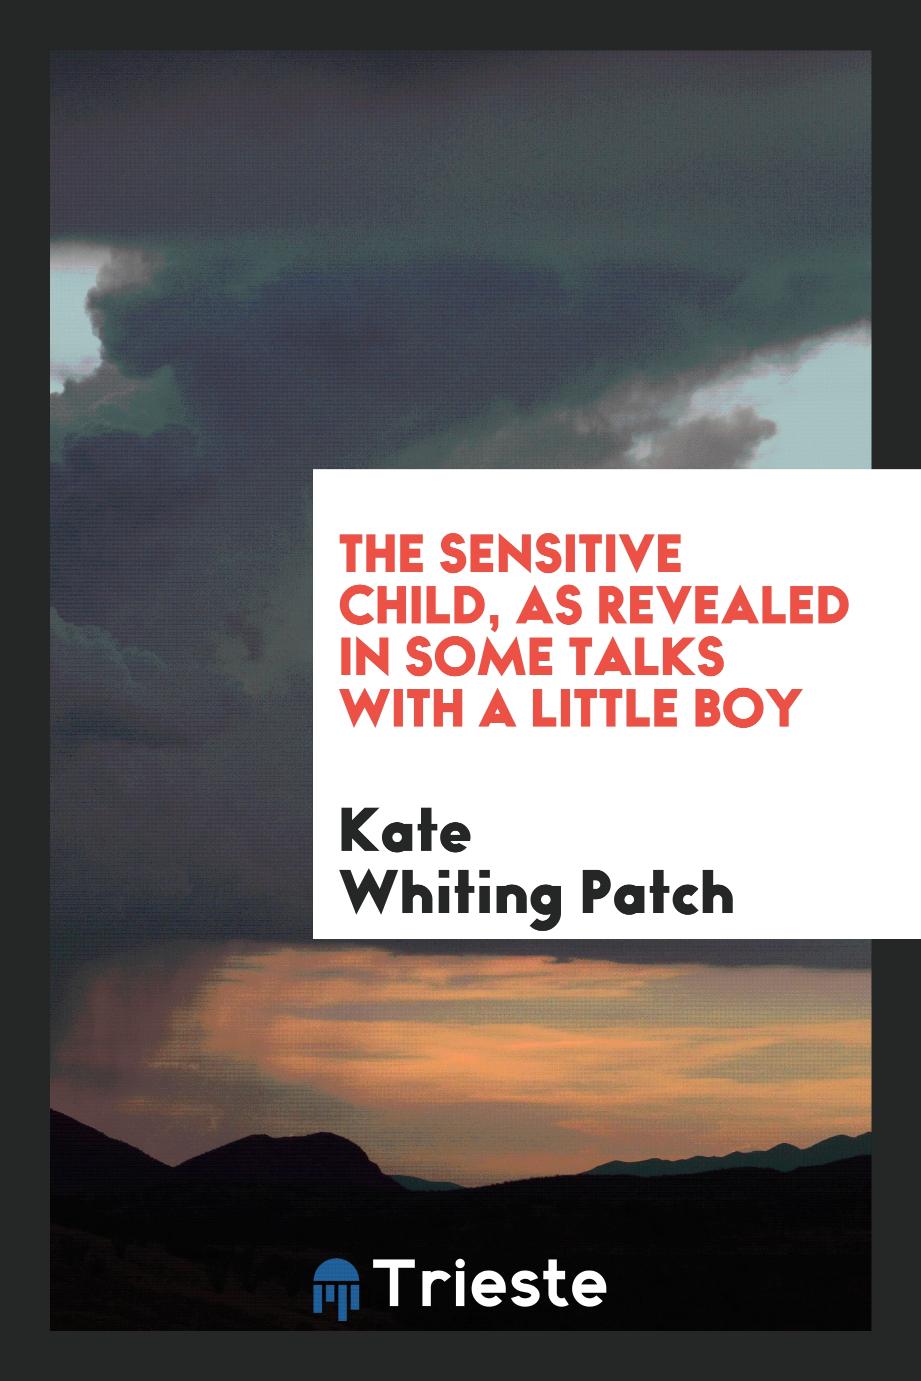 The Sensitive Child, as Revealed in Some Talks with a Little Boy